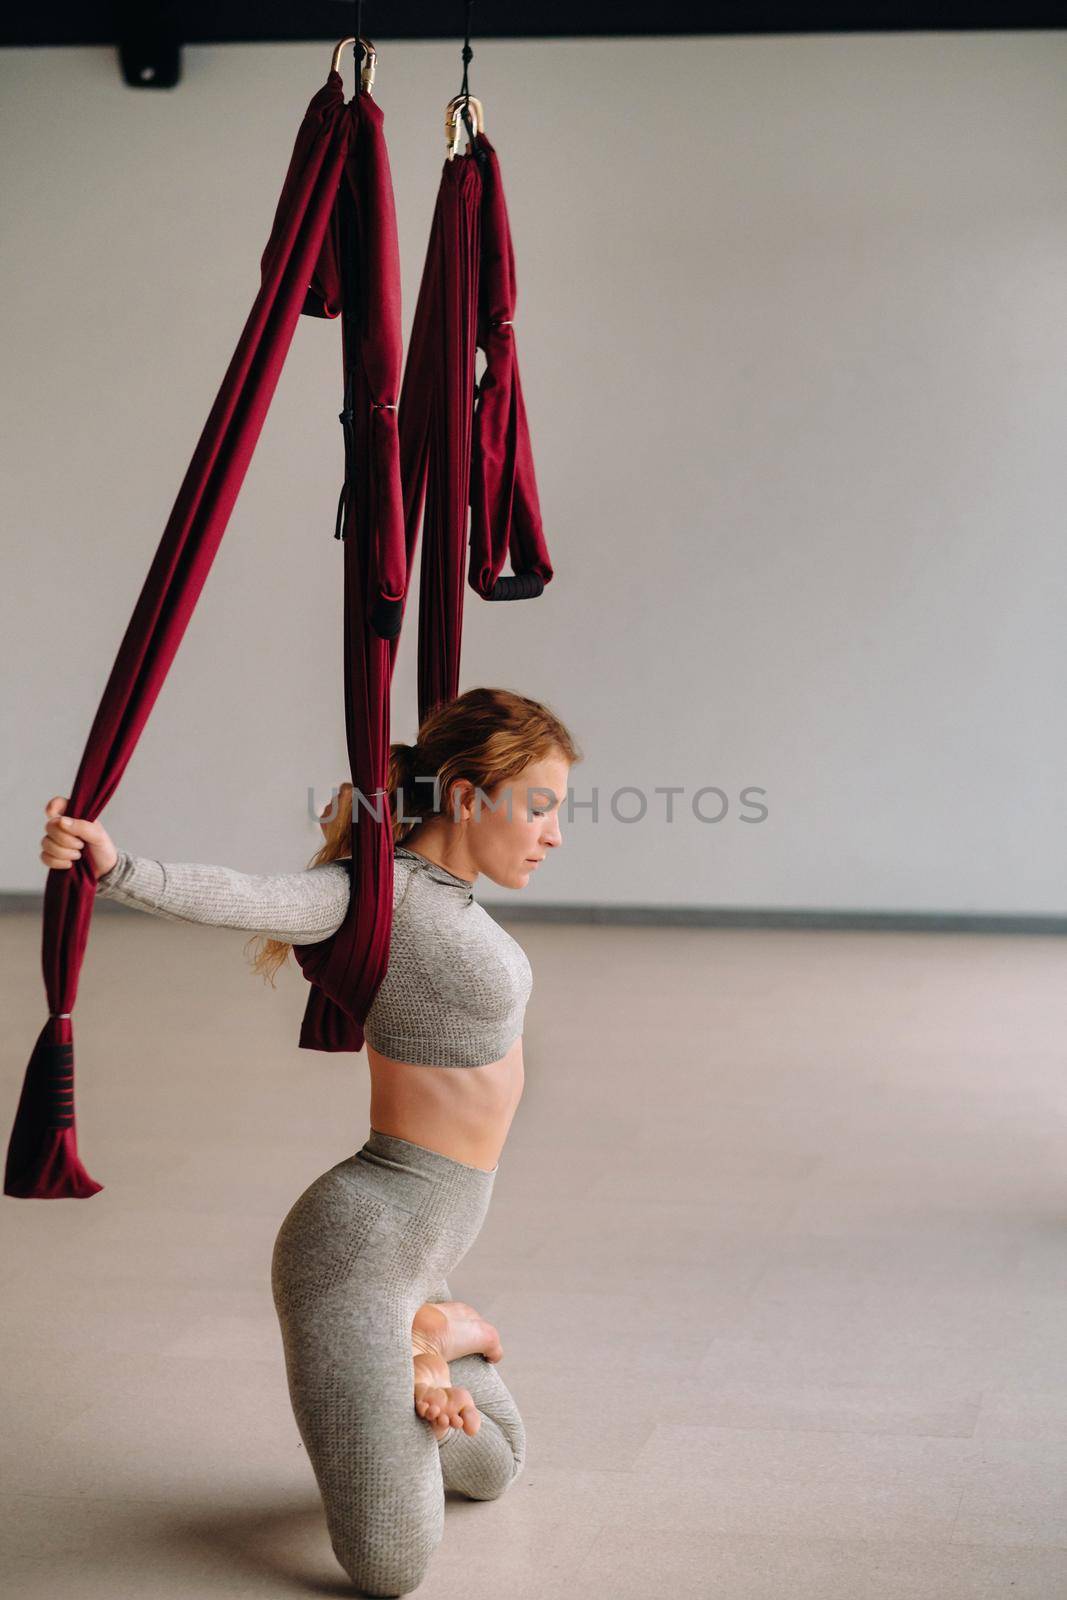 A woman does yoga on a suspended burgundy hammock in a bright gym.